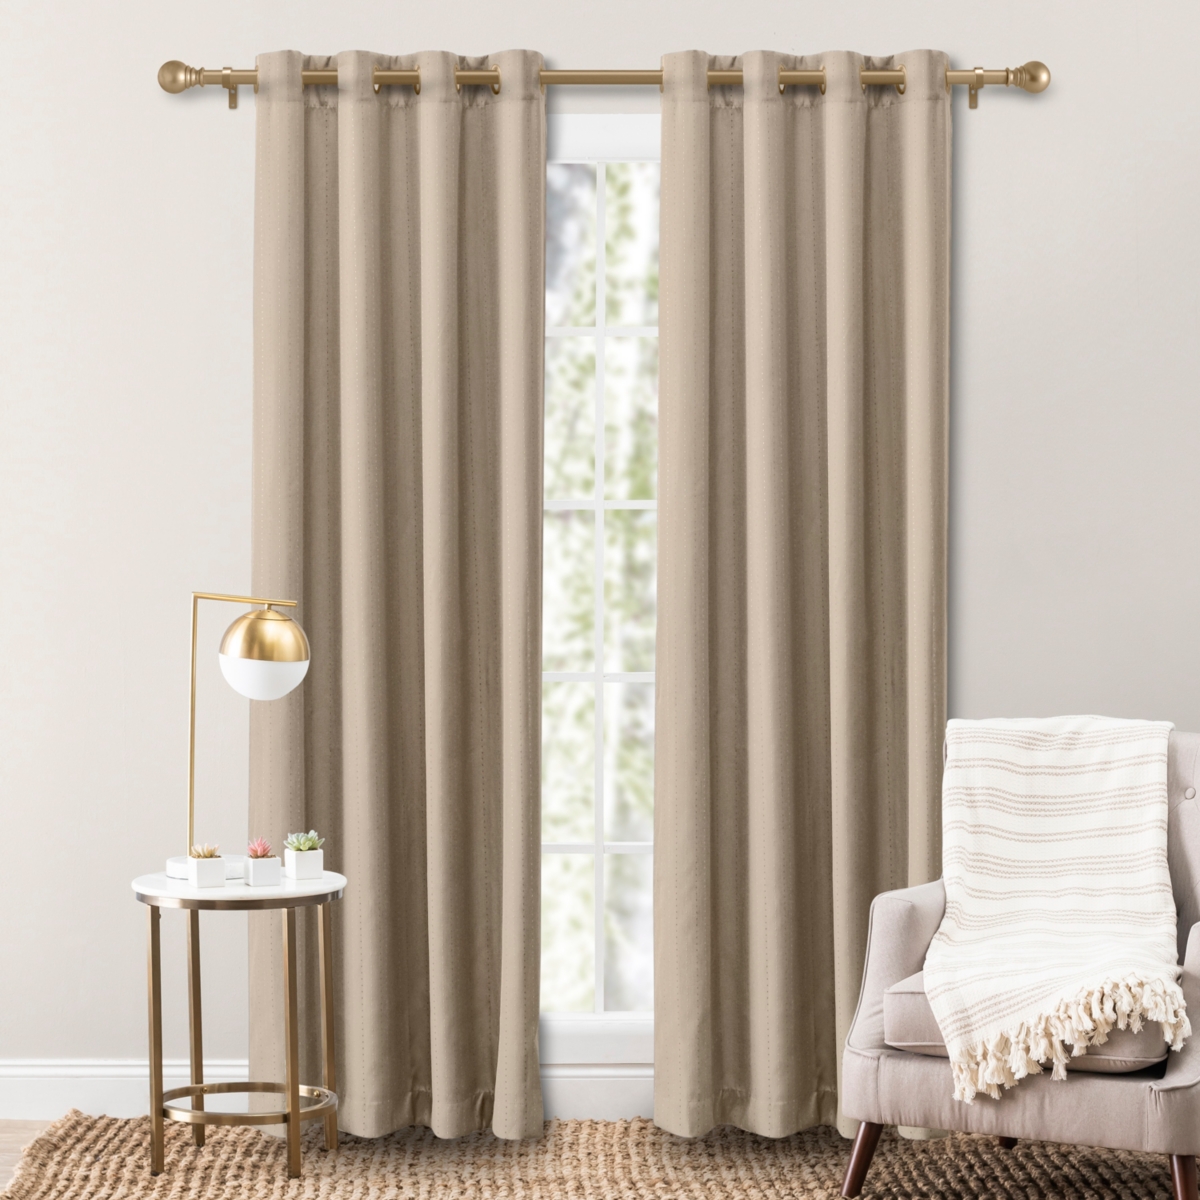 Grand Pointe Grommet Curtain Panel 54"W x 72"L - Natural